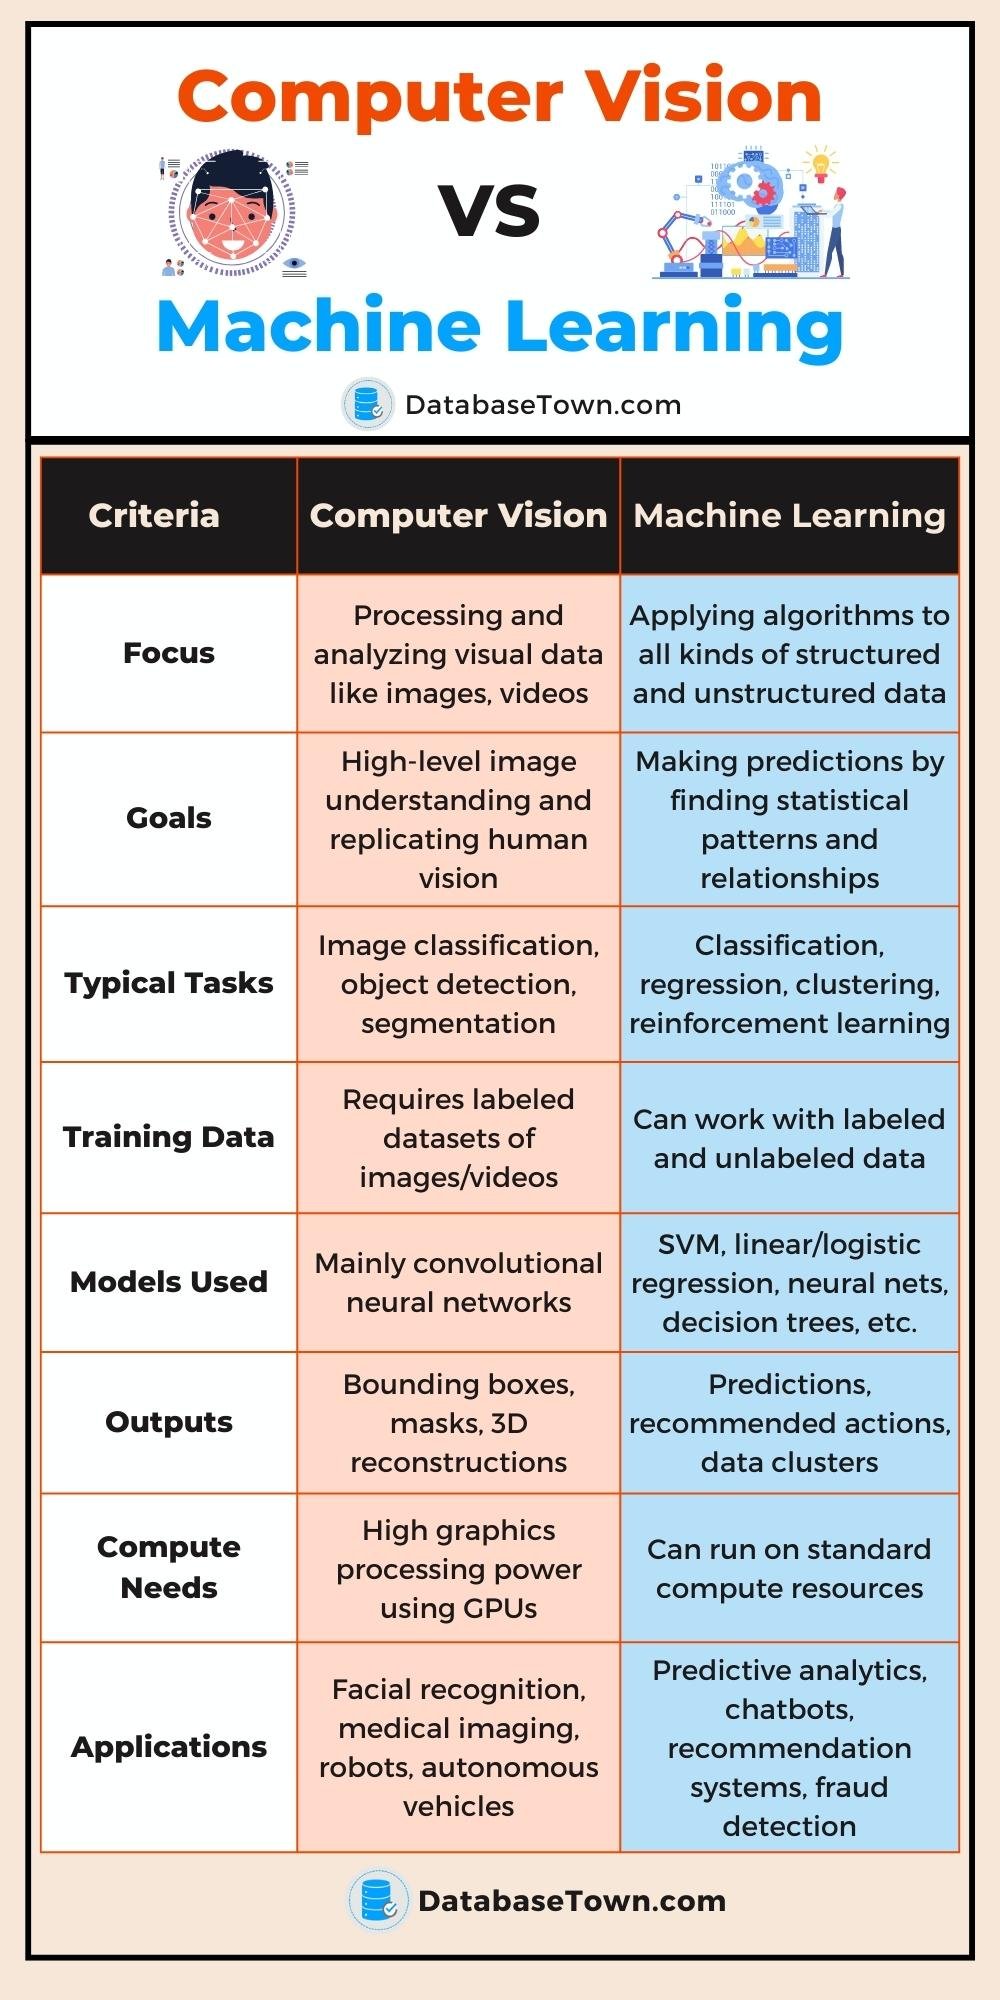 Computer Vision Vs Machine Learning - key differences